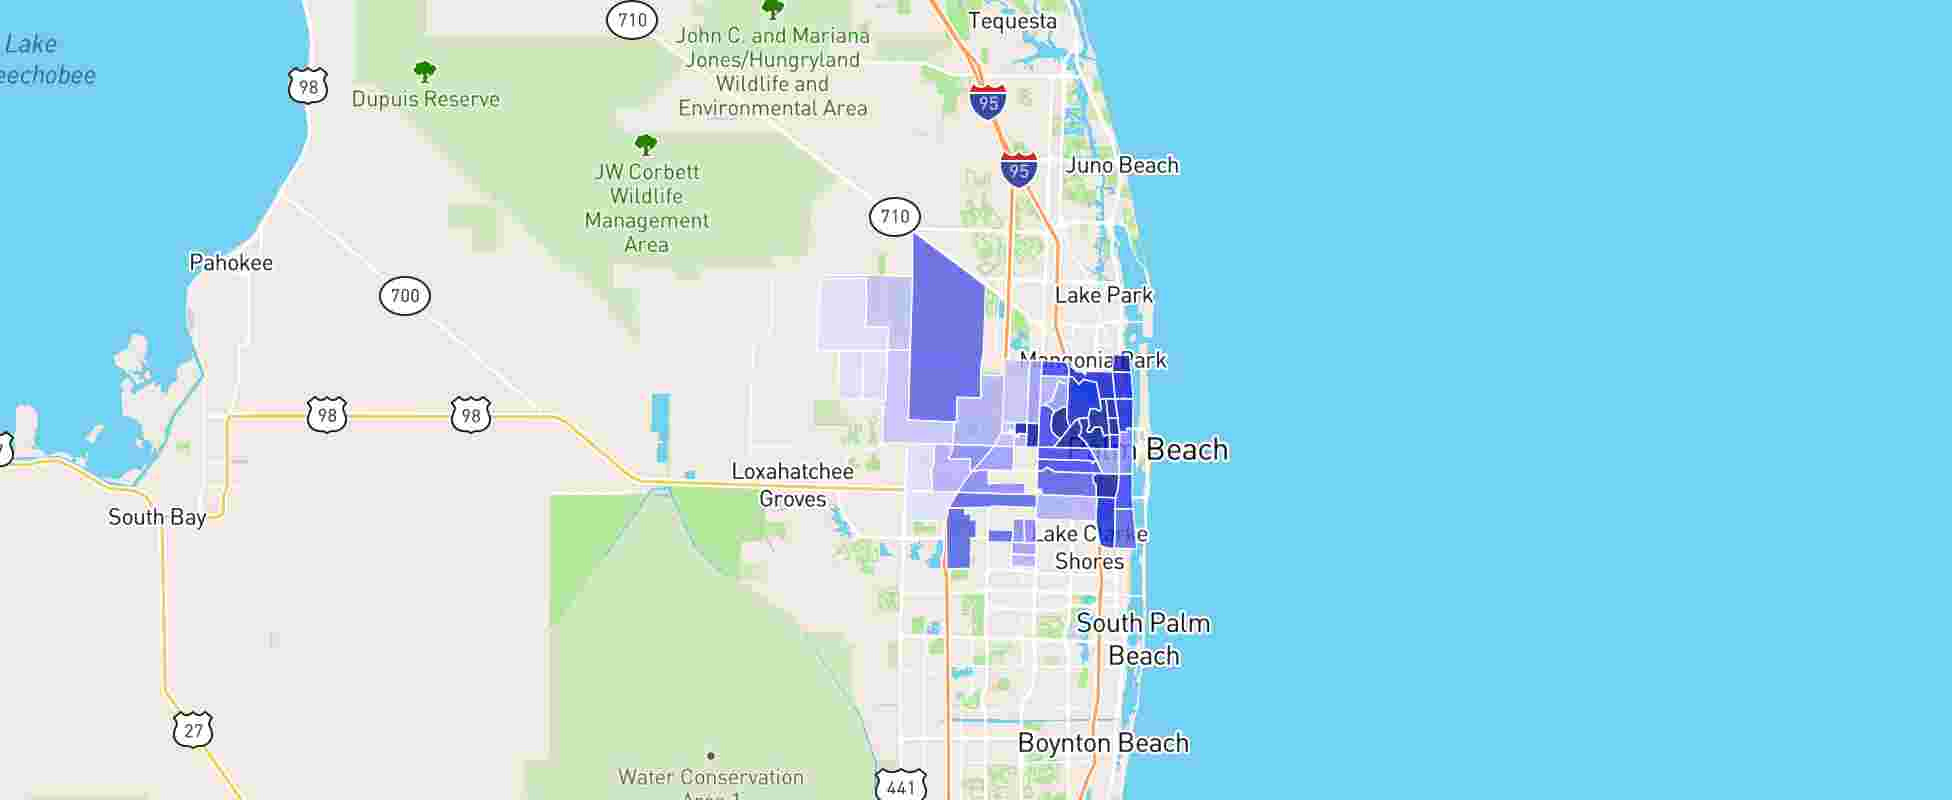 West Palm Beach Crime Rates And Statistics NeighborhoodScout